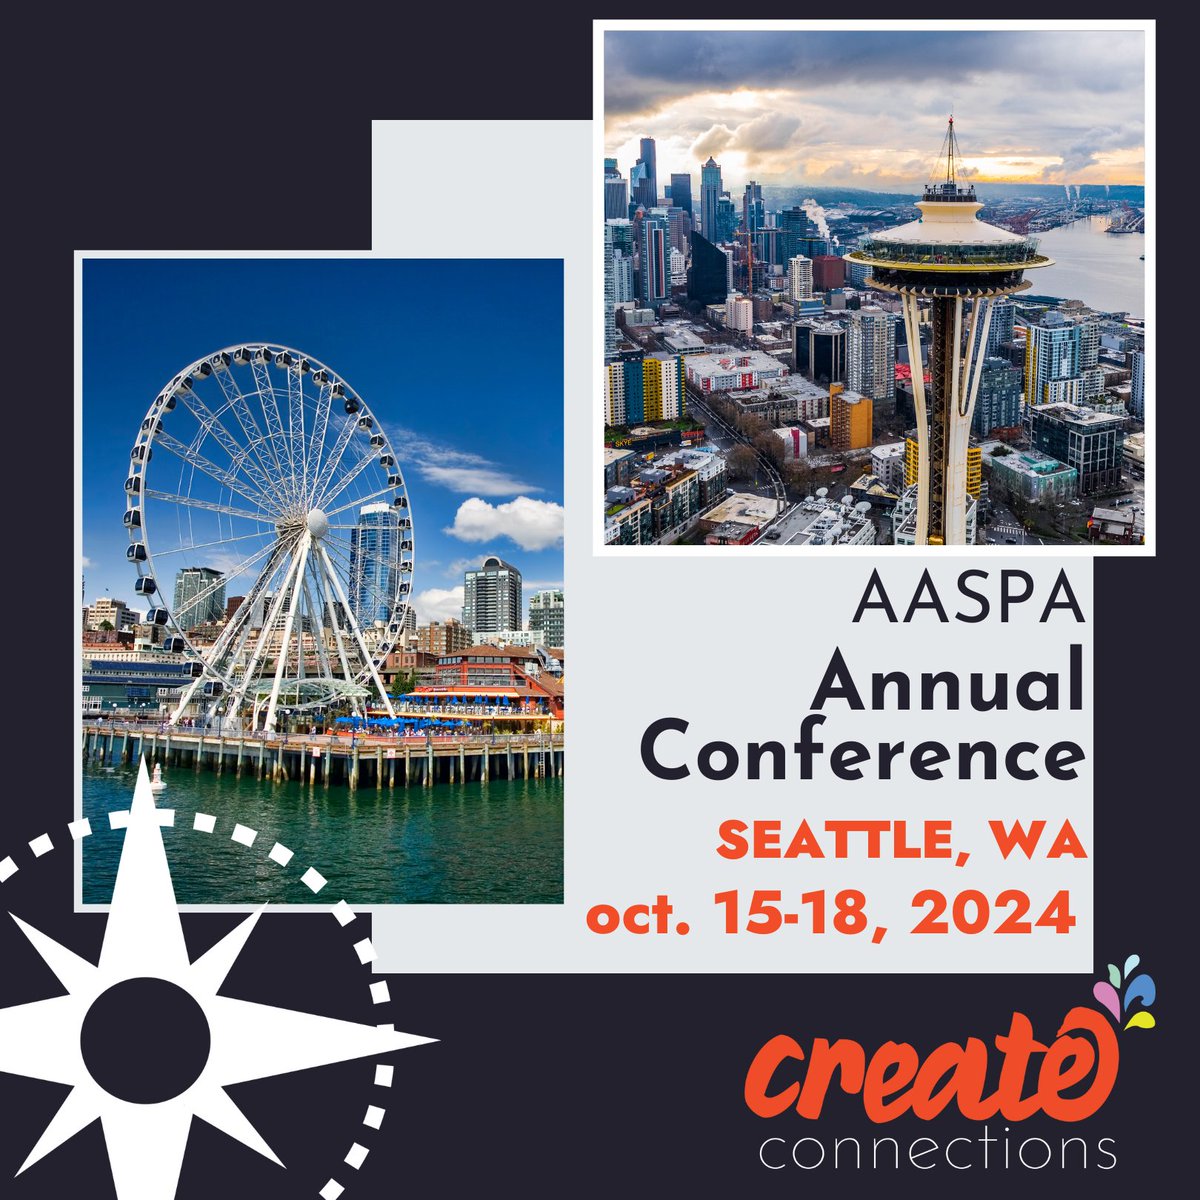 Want to present at AASPA's 86th Annual Conference? Submit a session proposal today and help attendees #CreateConnections 🔗bit.ly/3Tq78aM